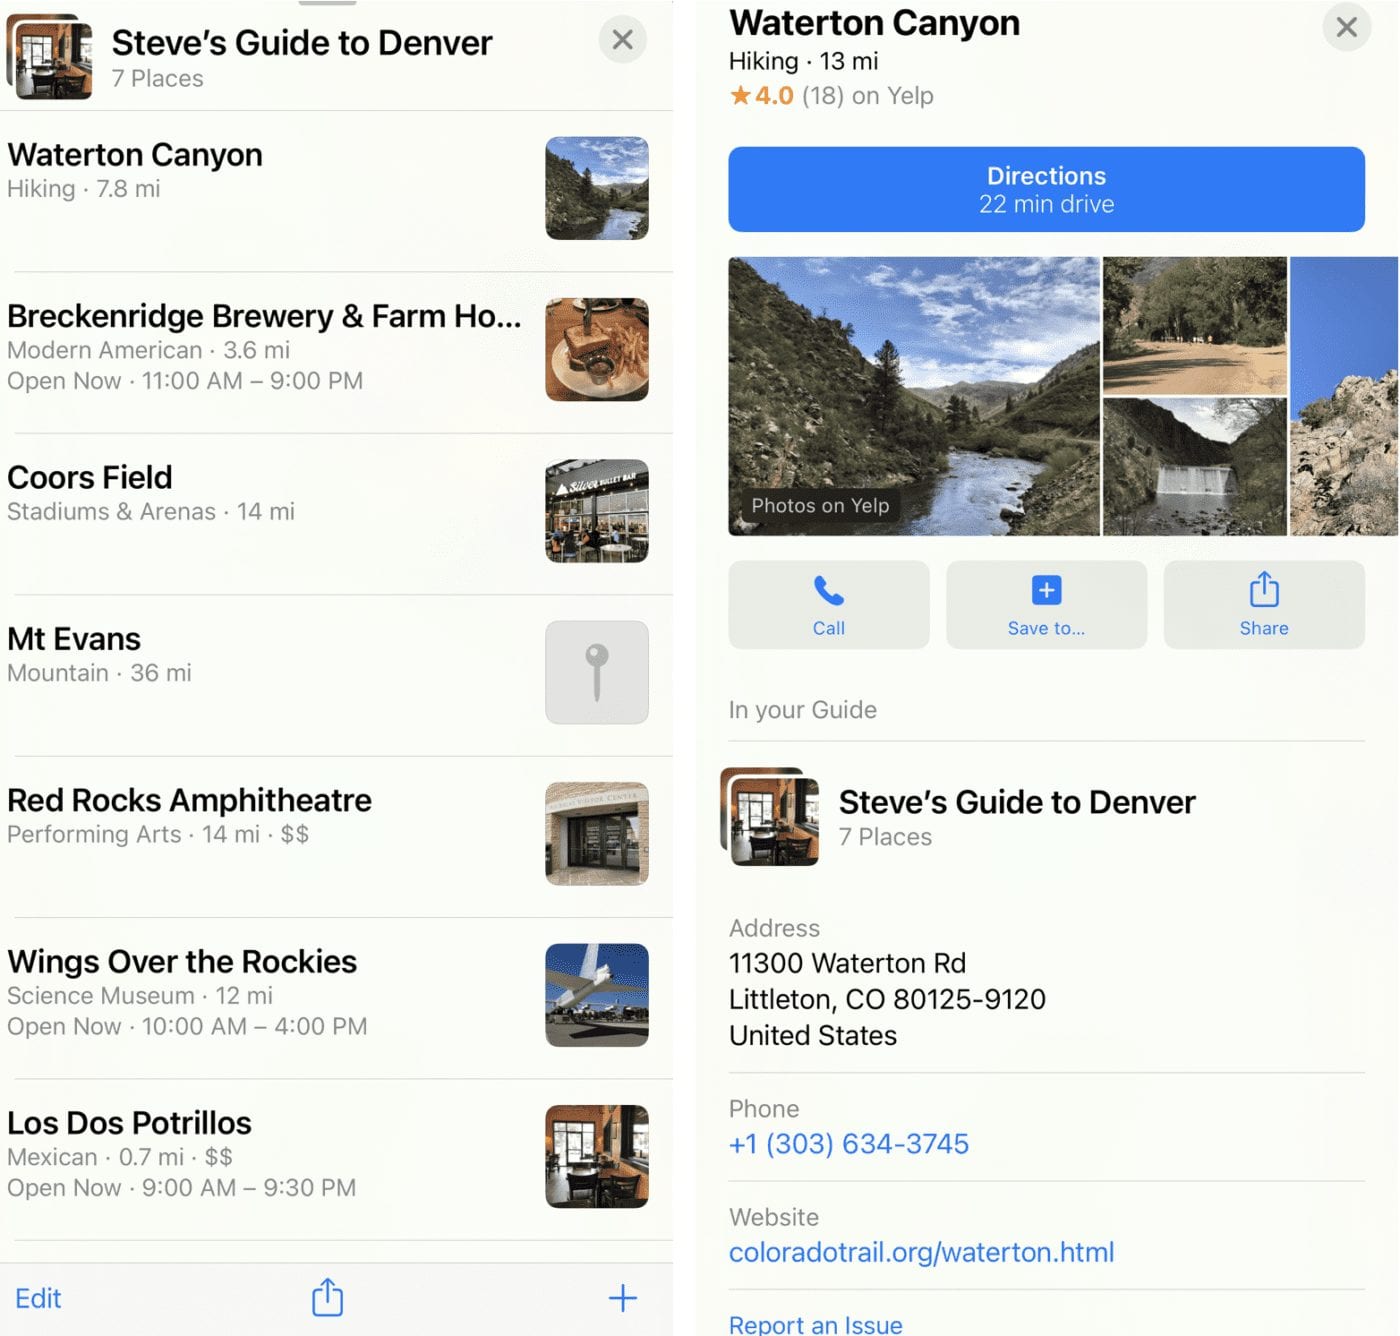 The completed Guide at left, with a single location listing at right